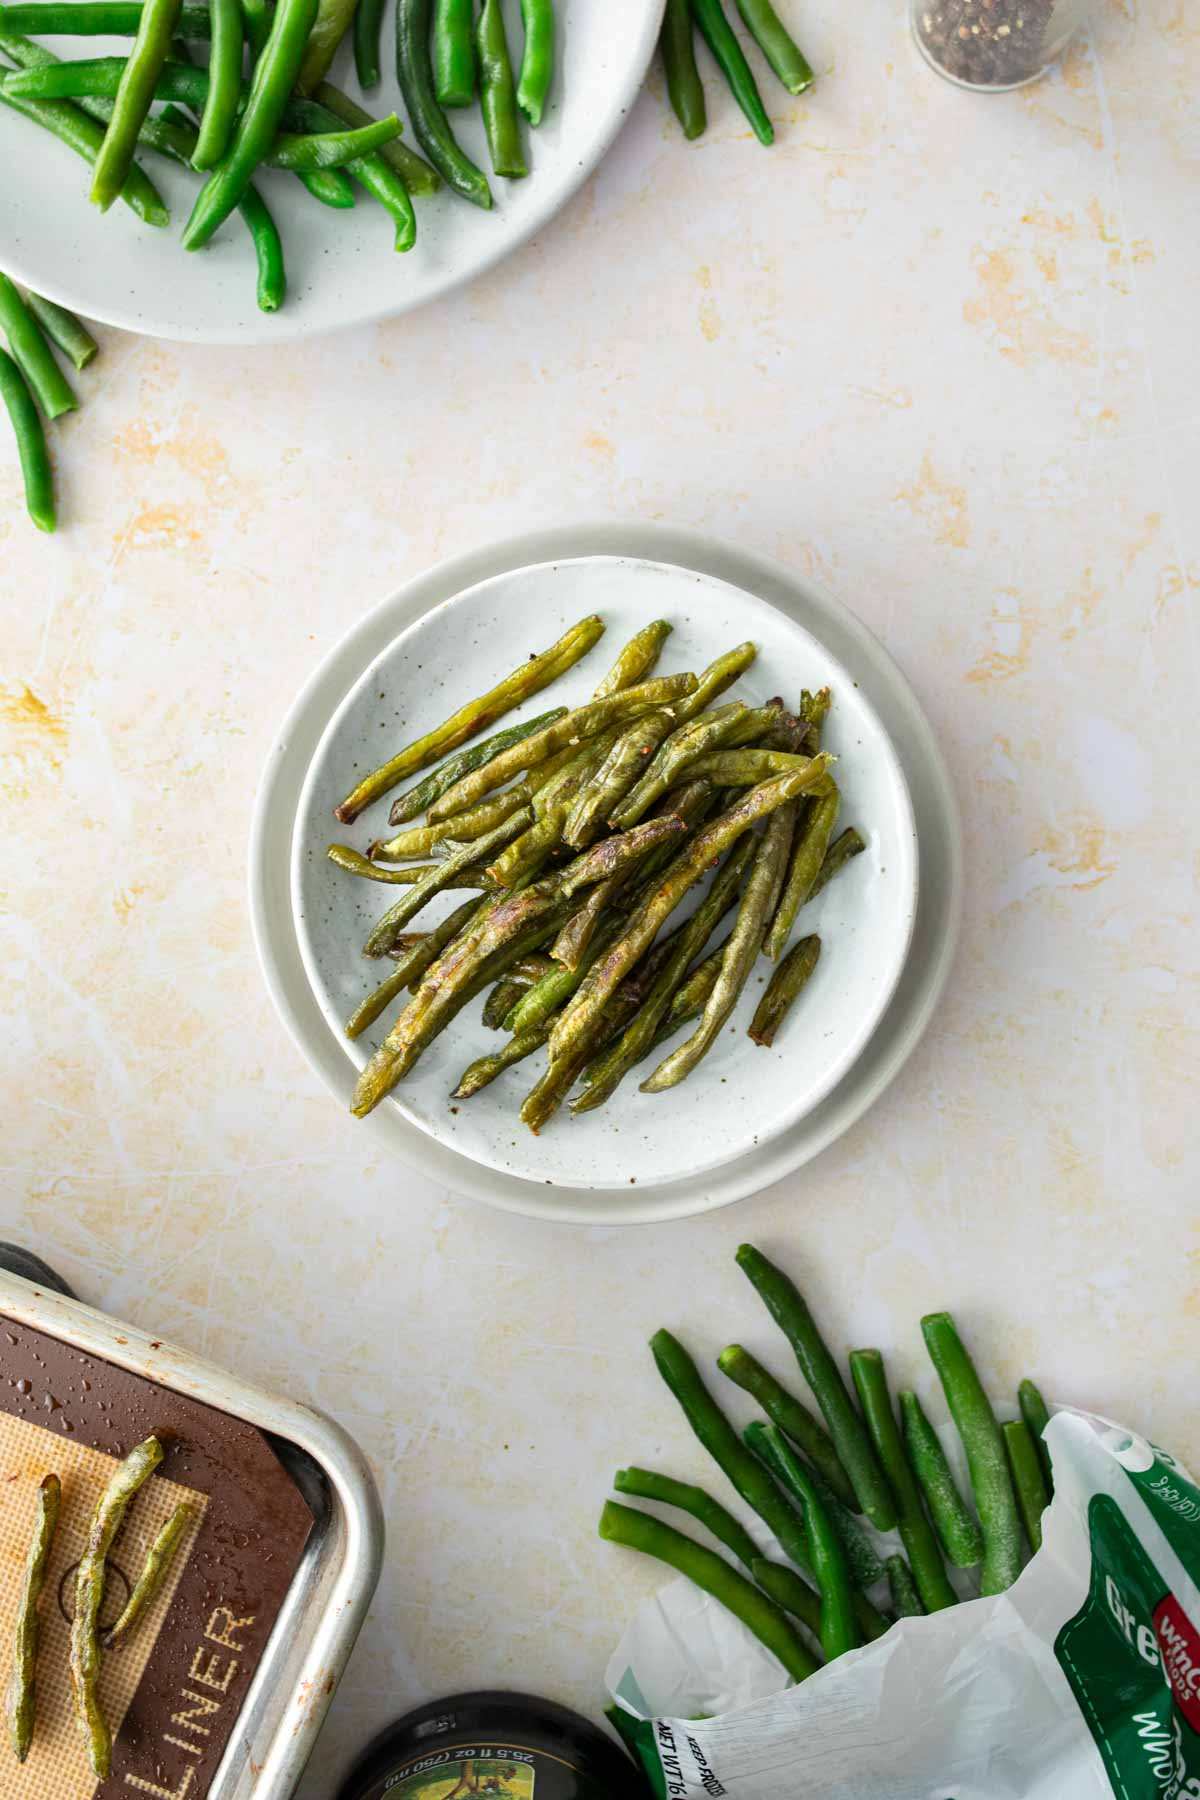 roasted green beans on plate, with green beans around